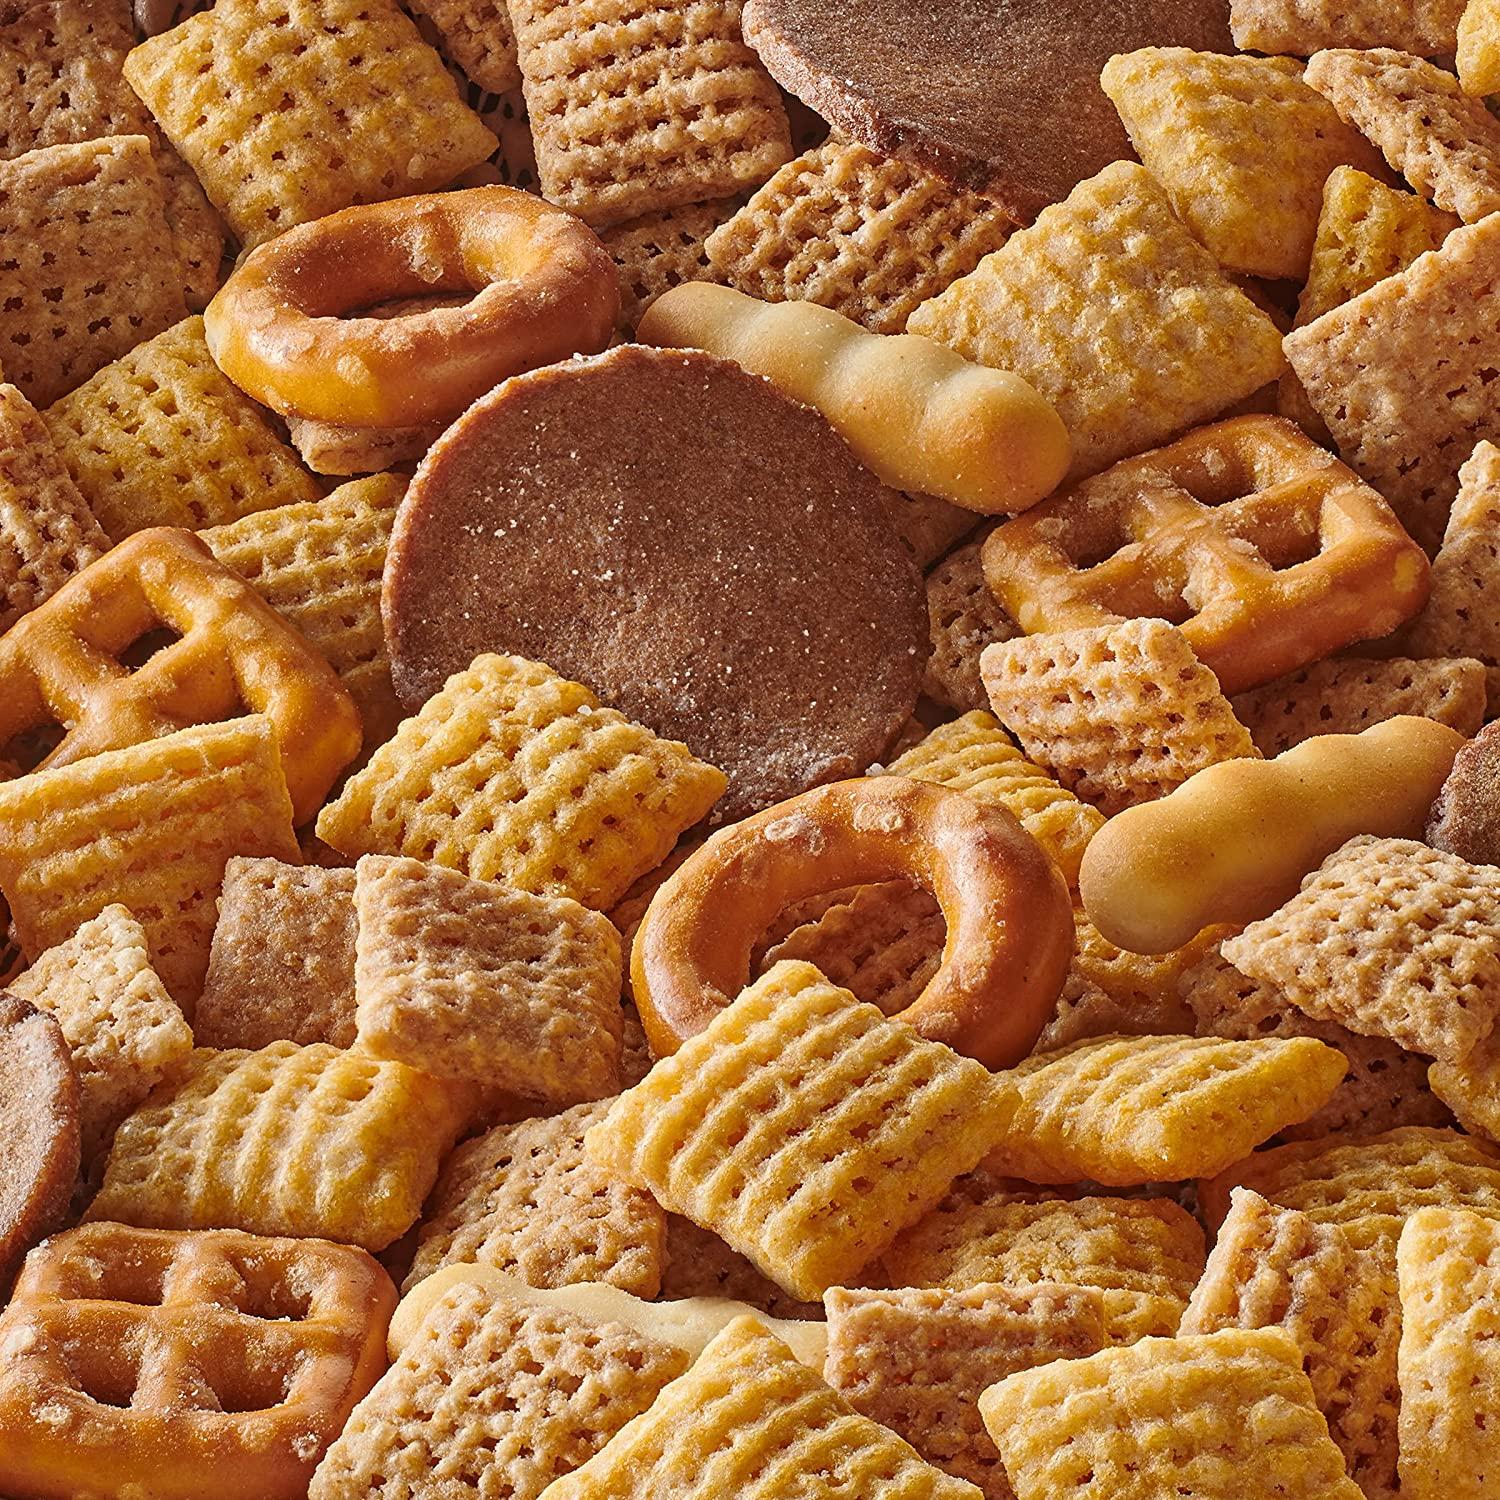 Chex Mix Traditional Snack Mix